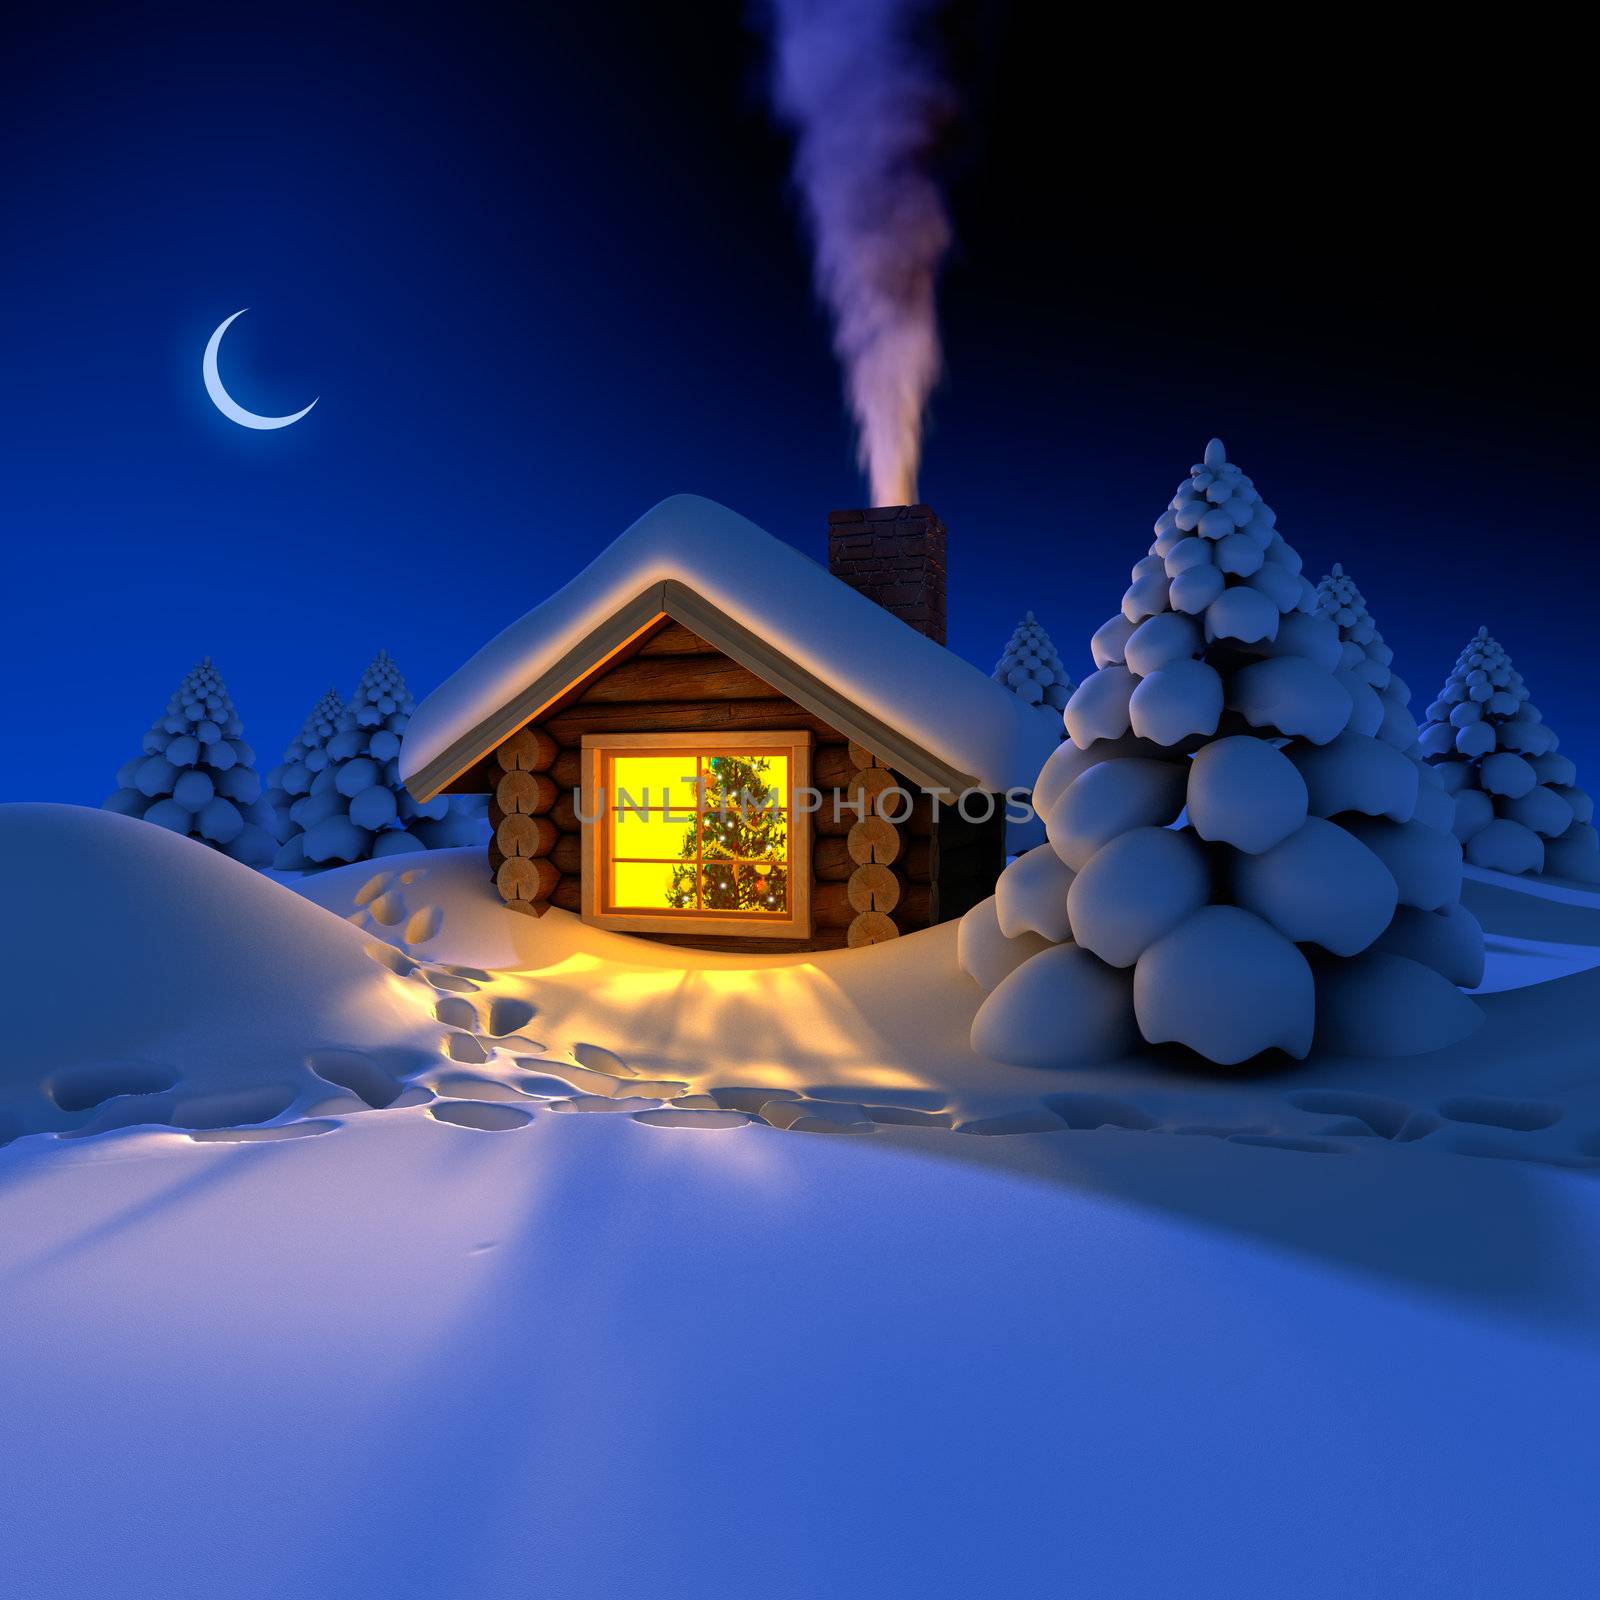 Little house in the woods on New Year's night by Antartis